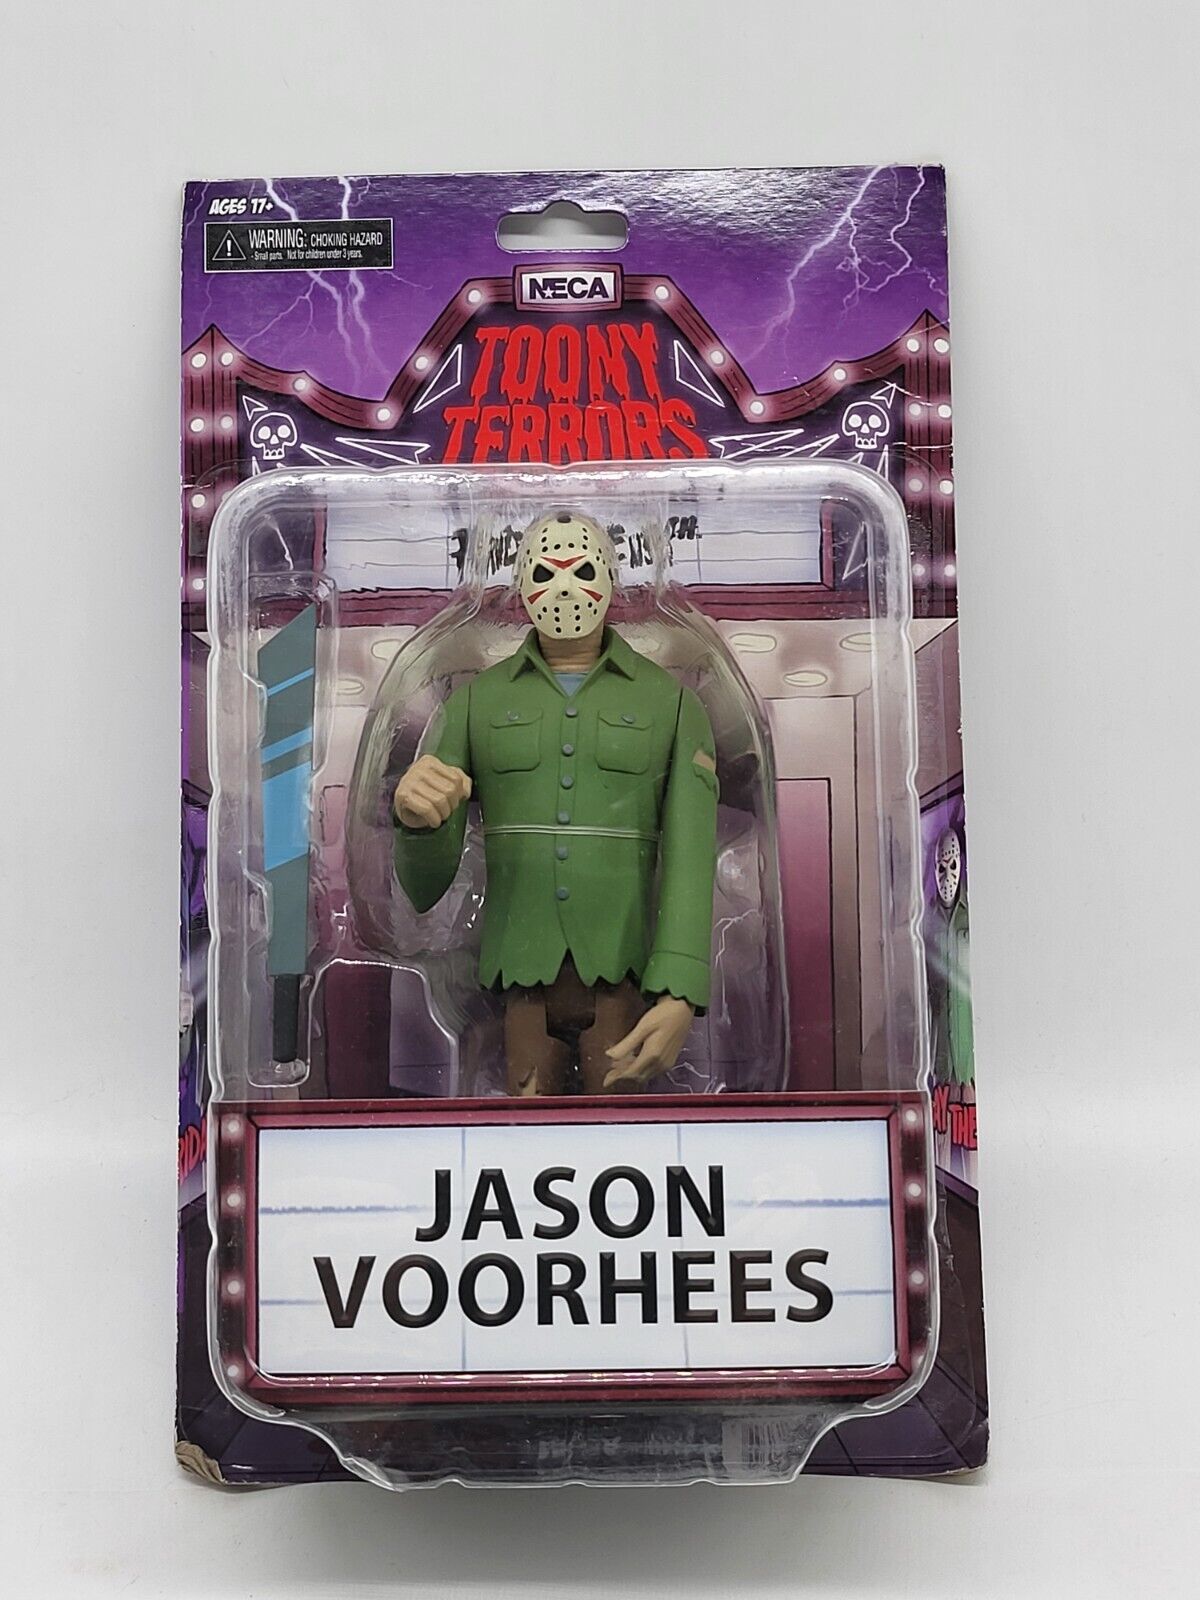 NECA Toony Terrors Friday The 13th Jason Voorhees Action Figure (Box Damage)